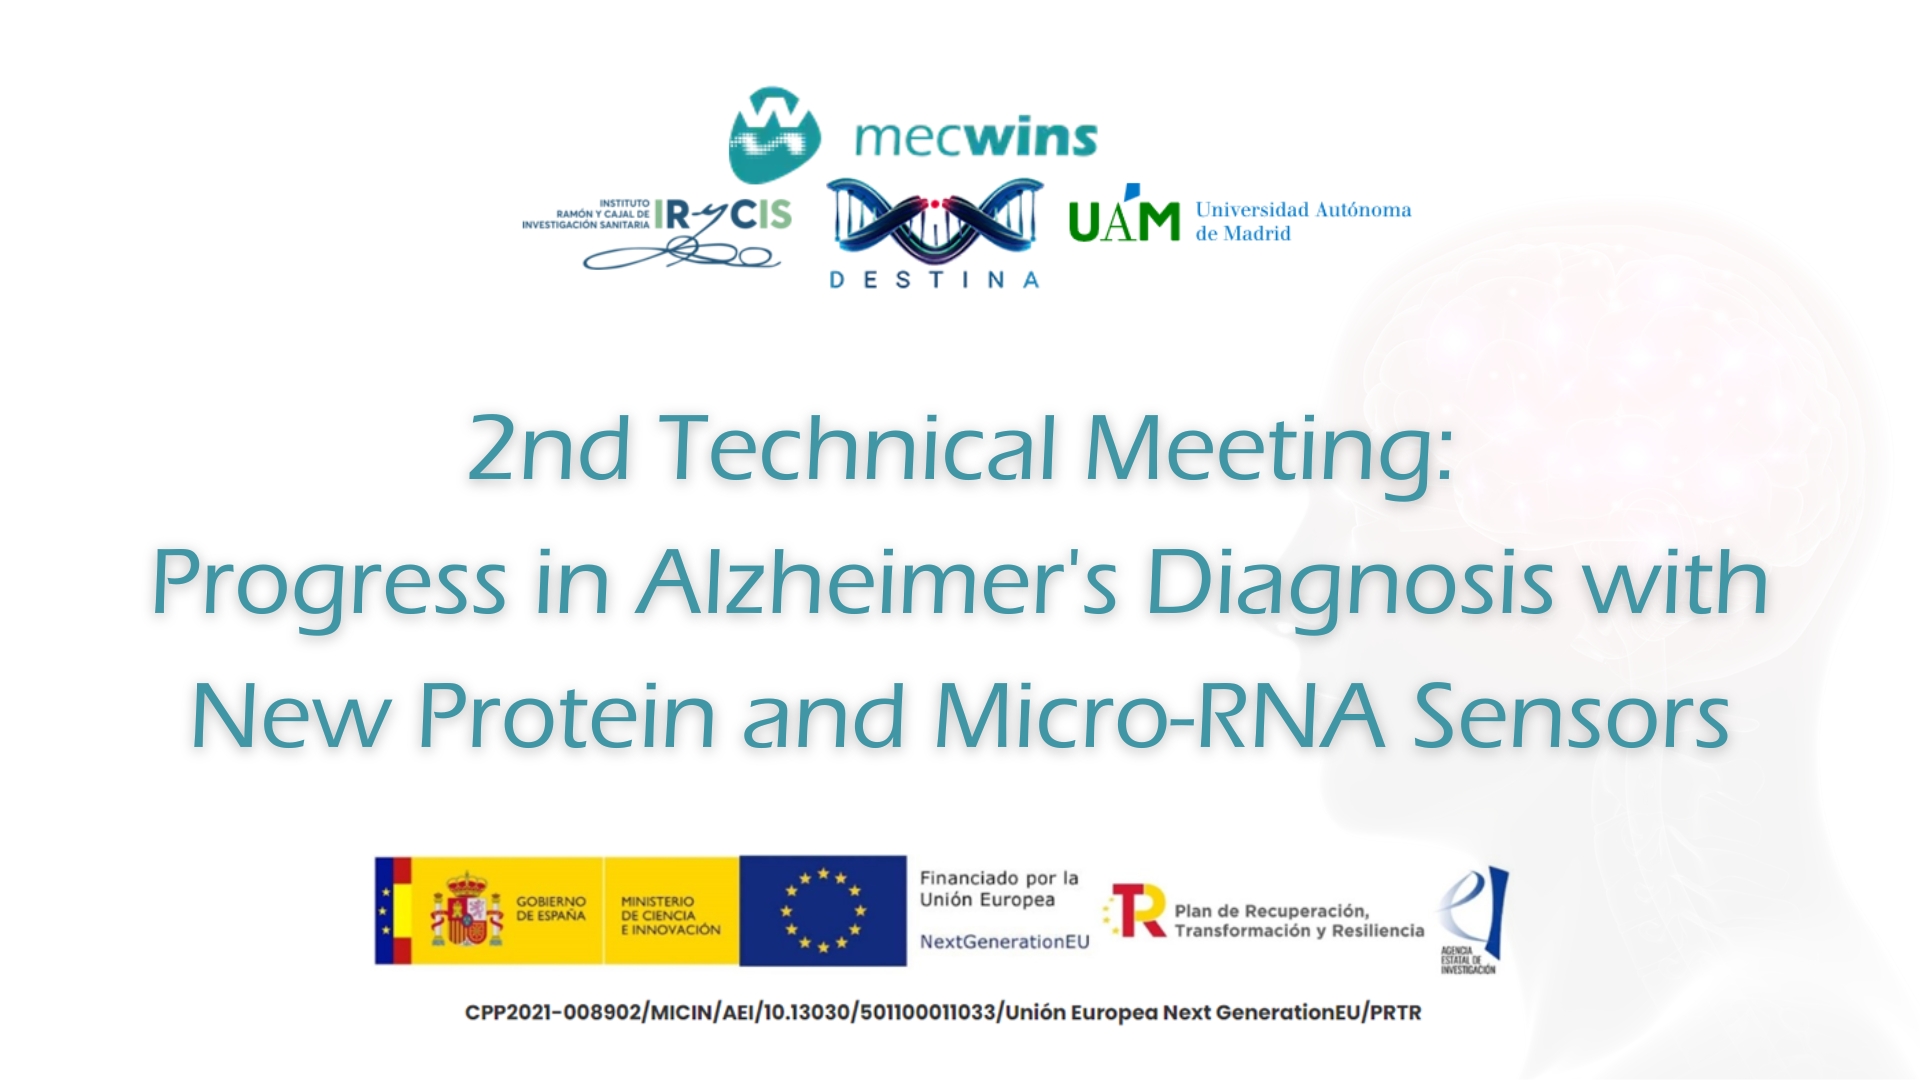 2nd Technical Meeting Progress in Alzheimer's Diagnosis with New Protein and Micro-RNA Sensors